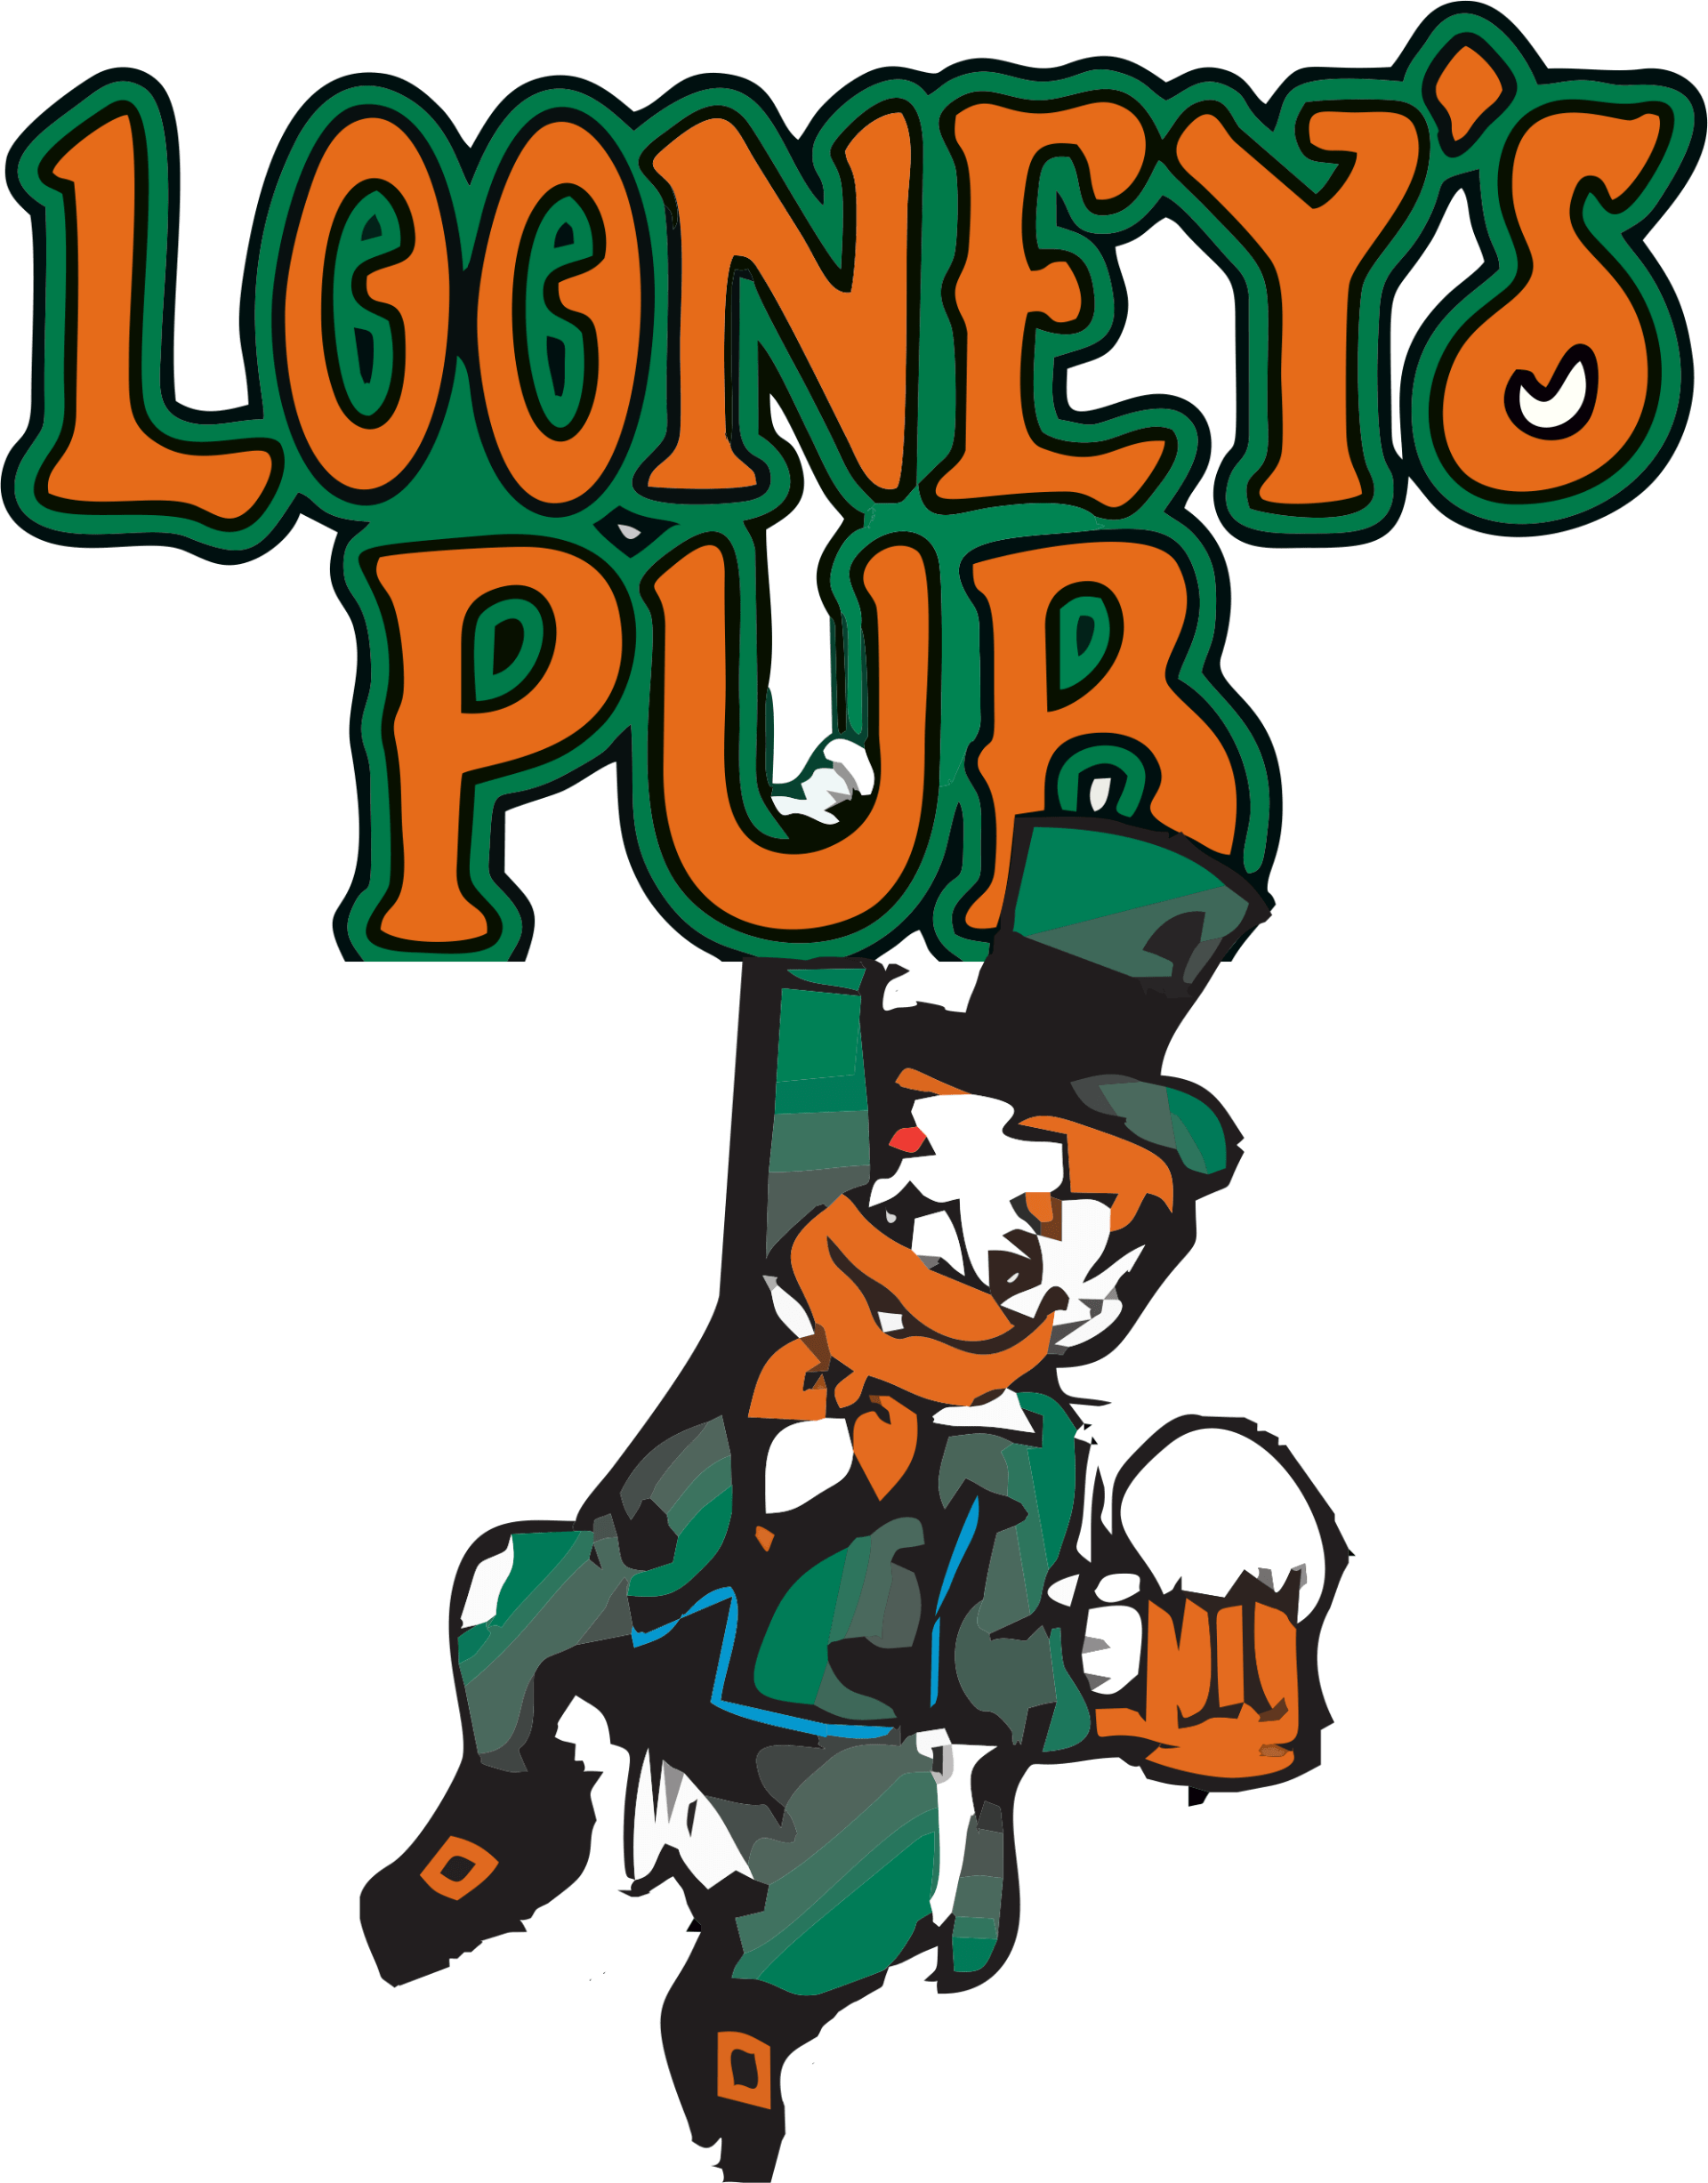 A logo for looney 's pub with a leprechaun holding a beer